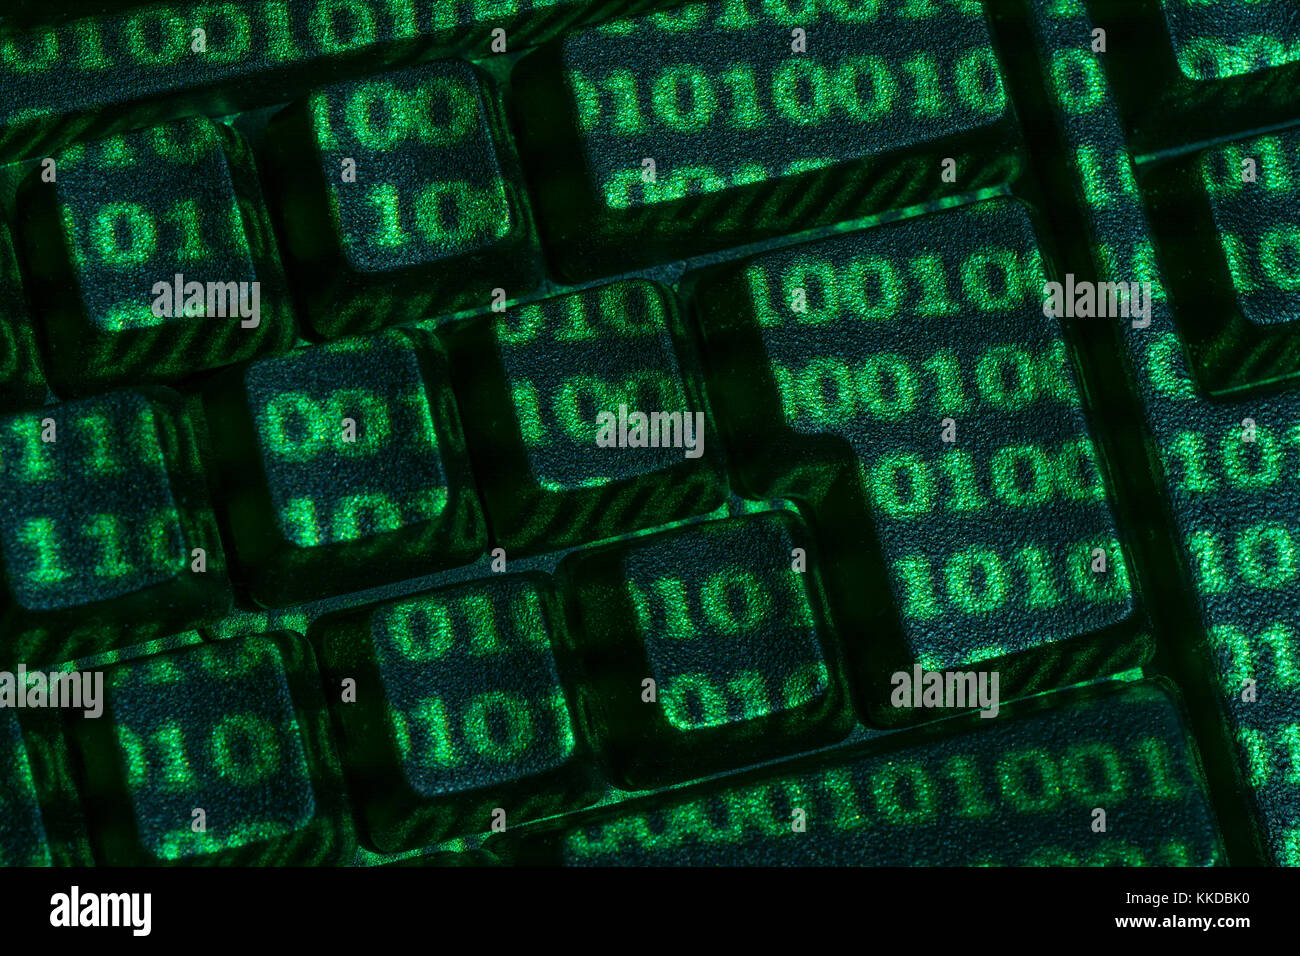 Black Qwerty keyboard + green Binary 0's & 1's surface projected. For cybercrime, darkweb, data encryption, world password day, cyber threat, hacking. Stock Photo